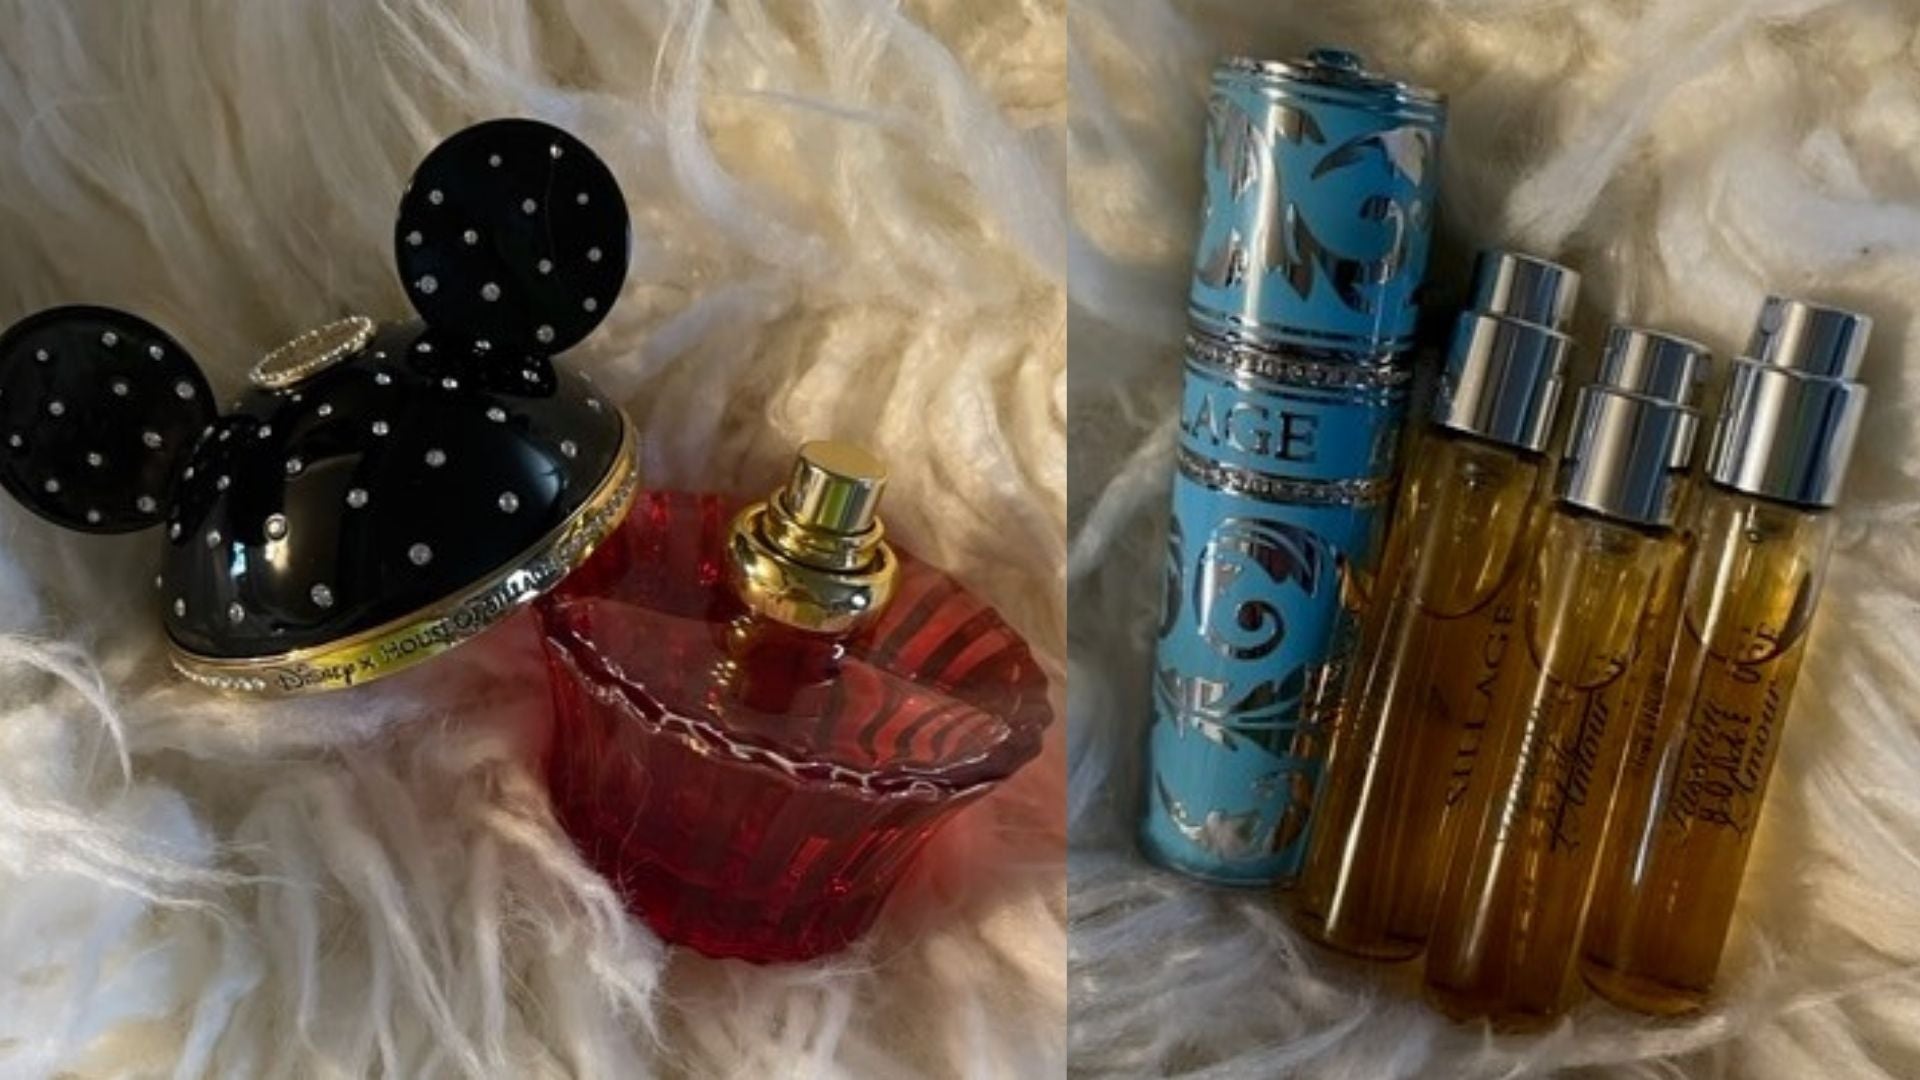 review, photos, ingredients, trends, perfume, fragrances, 2021, 2022, house of silage, mickey mouse the fragrance, disney x house of sillage, arabesque collection, discovery sets, travel size, best high end fragrances, best luxury fragrances